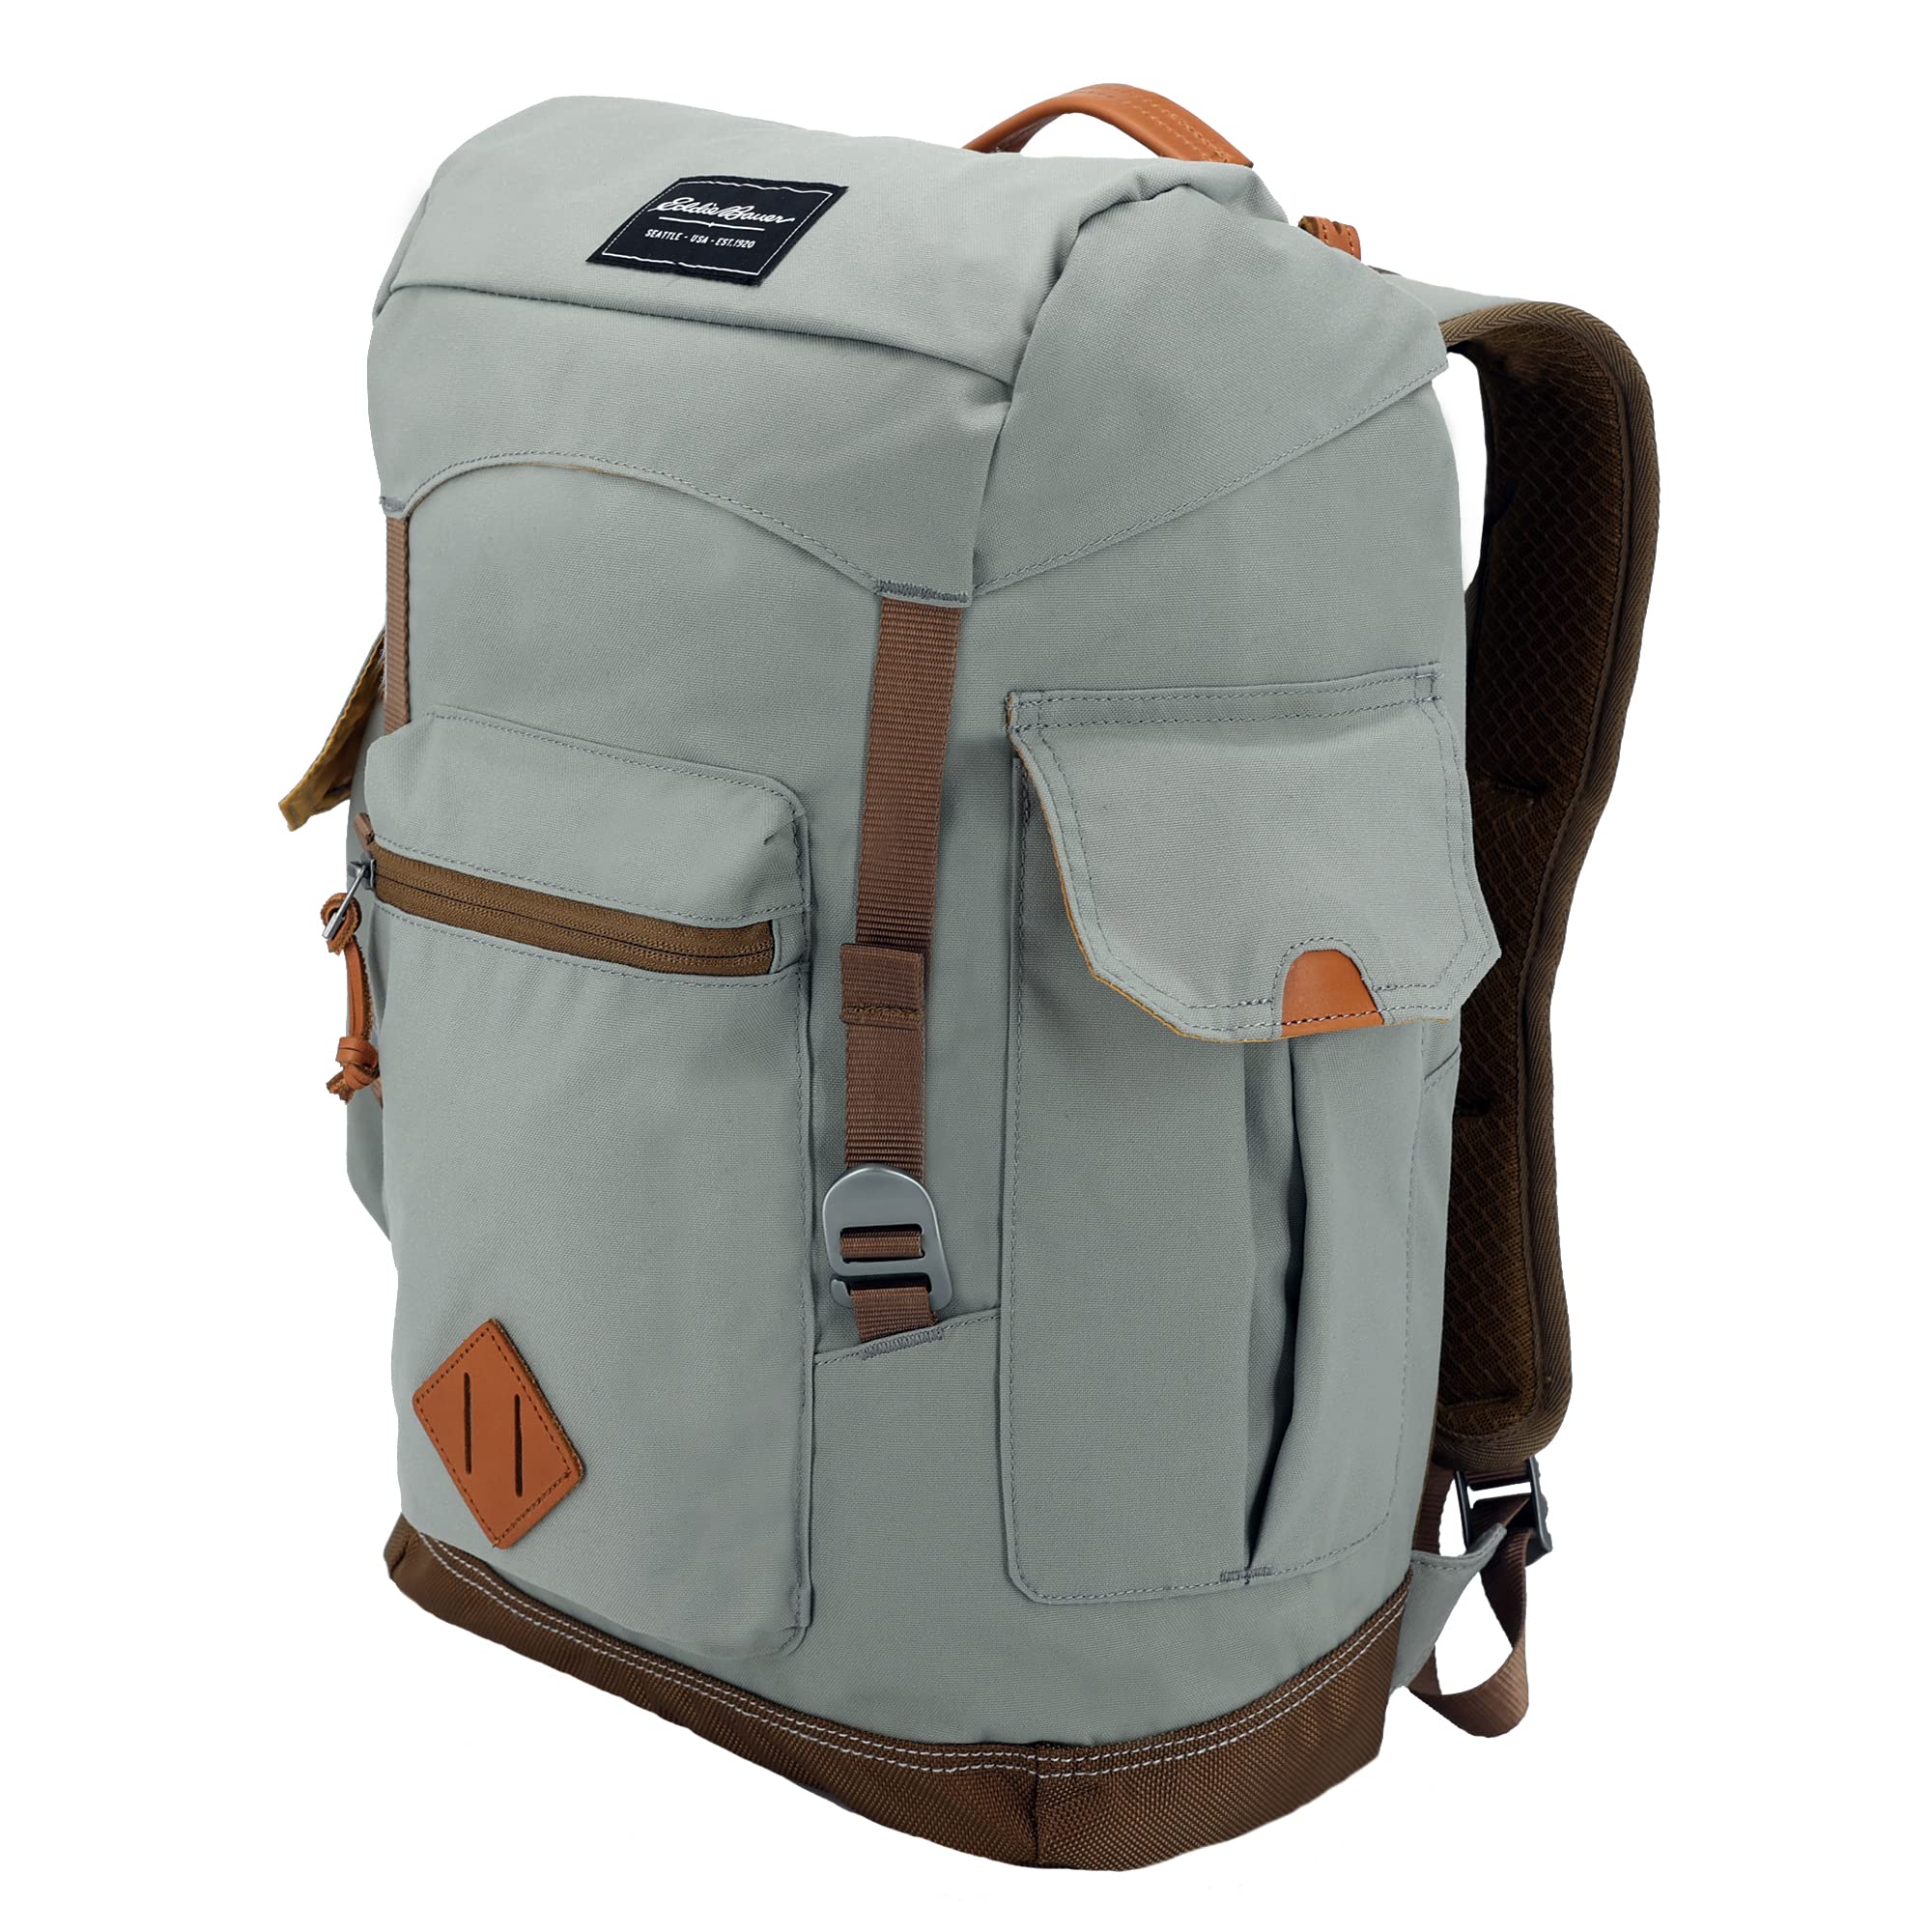 Eddie Bauer Bygone Backpack with Exterior Pockets and Laptop Compatible Sleeve (Multiple Sizes Available), Light Heather Grey, 25L